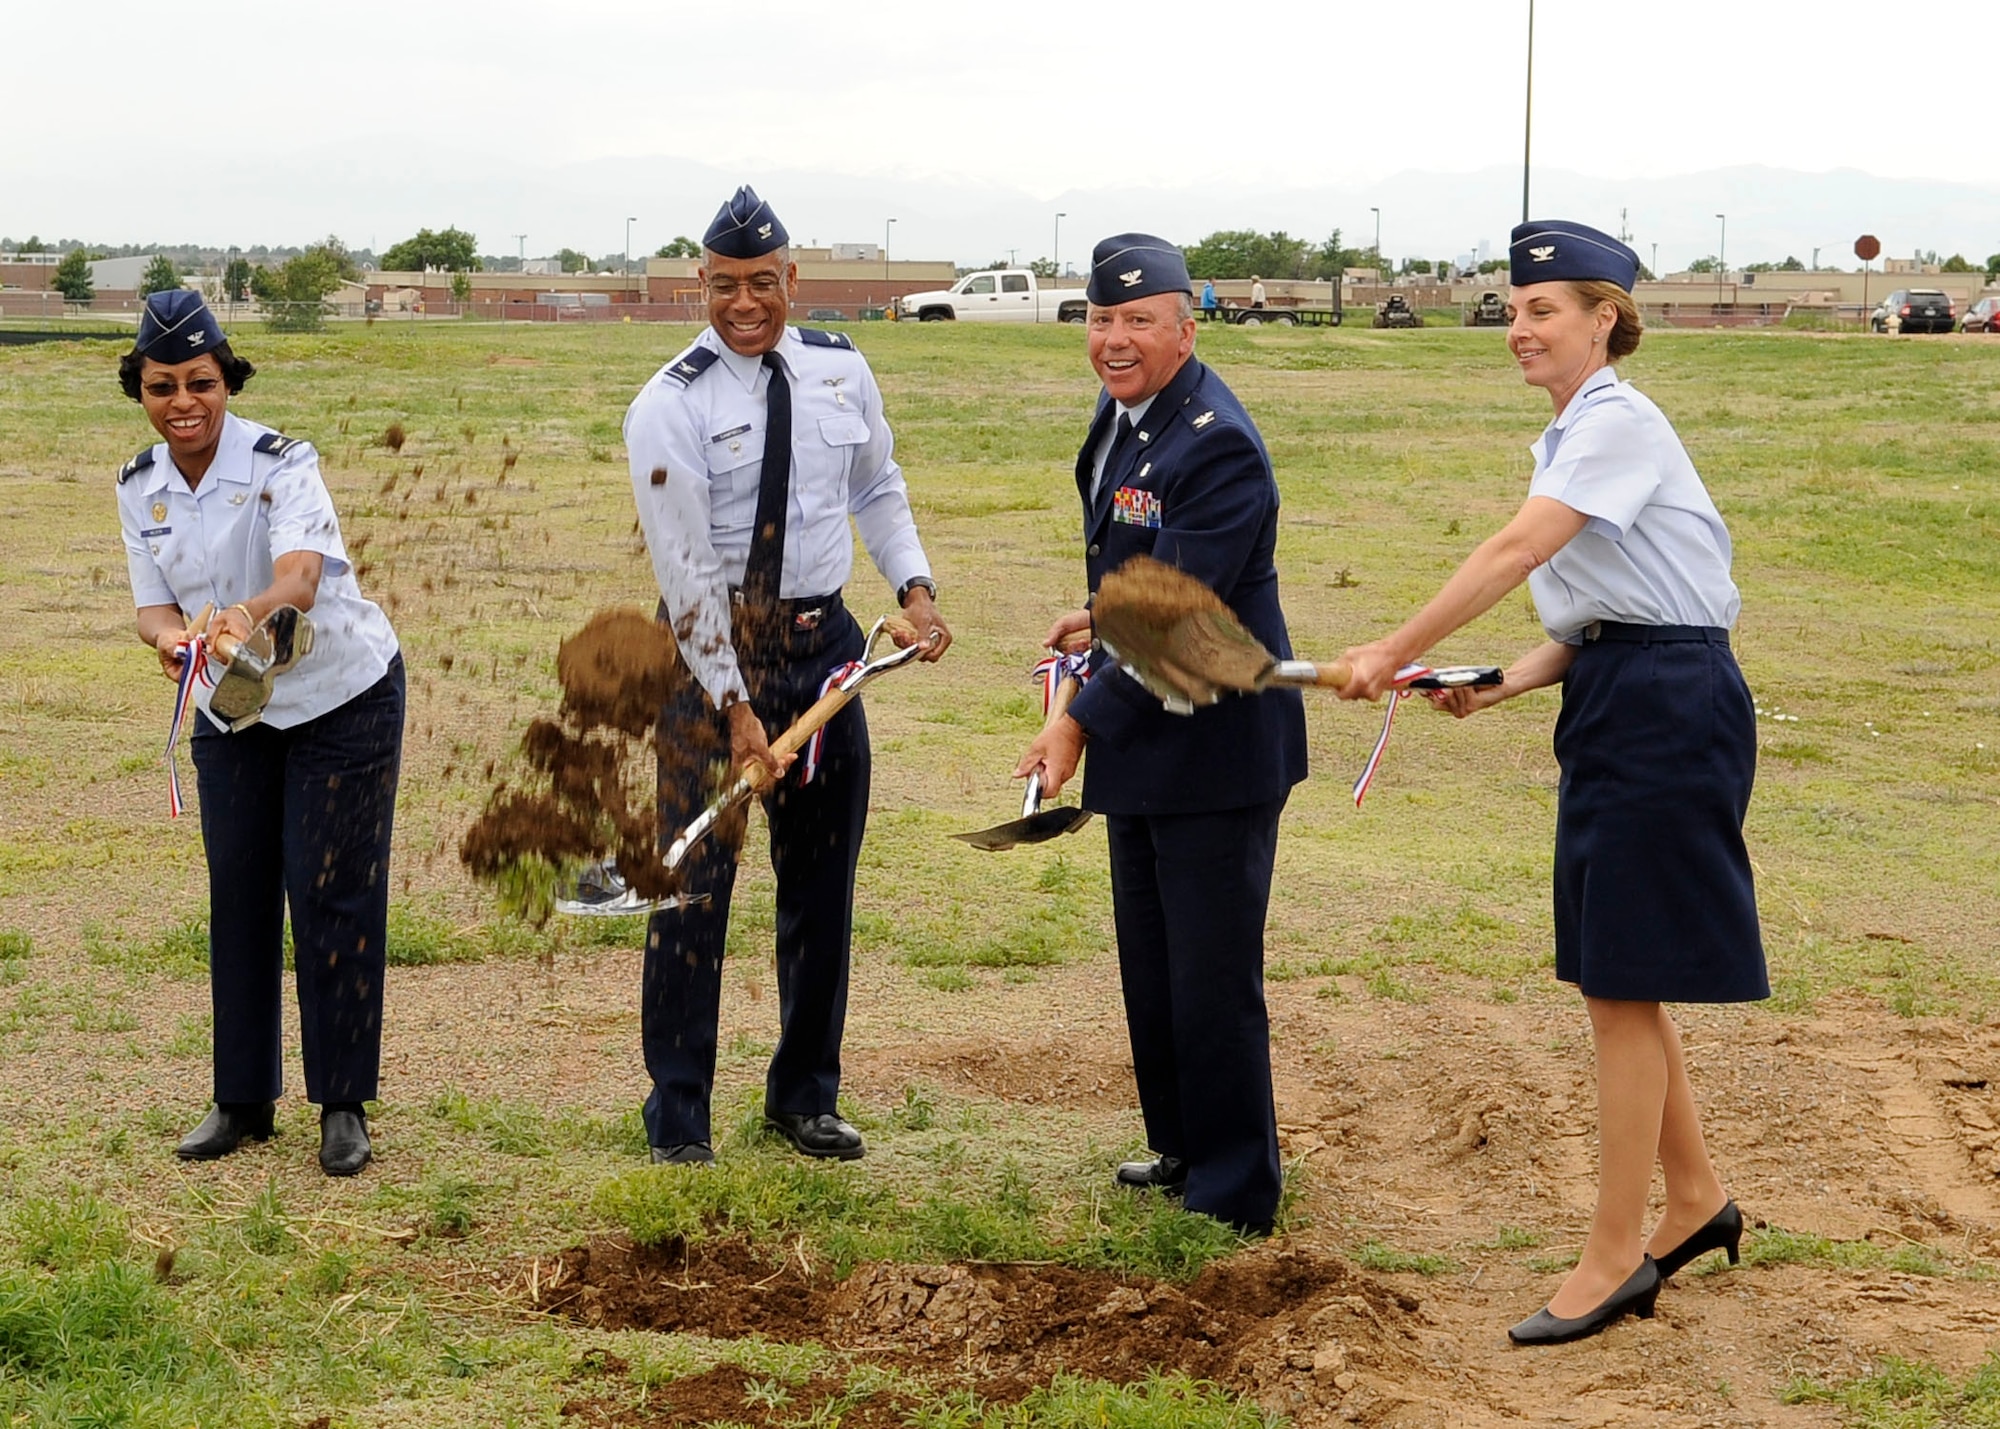 BUCKLEY AIR FORCE BASE, Colo. – Colonels Charlotte Wilson, 460th Space Wing vice commander, Charles Campbell, Air Force Space Command Surgeon General, Michael Chyrek, 460th Medical Group commander and Kirsten Watkins, 460th Medical Support Squadron commander break ground for a new pharmacy during an official ceremony  here, June 15.  The pharmacy, currently located off base, is one of many projects being constructed on base.  (U.S. Air Force photo by Senior Airman Steven Czyz)